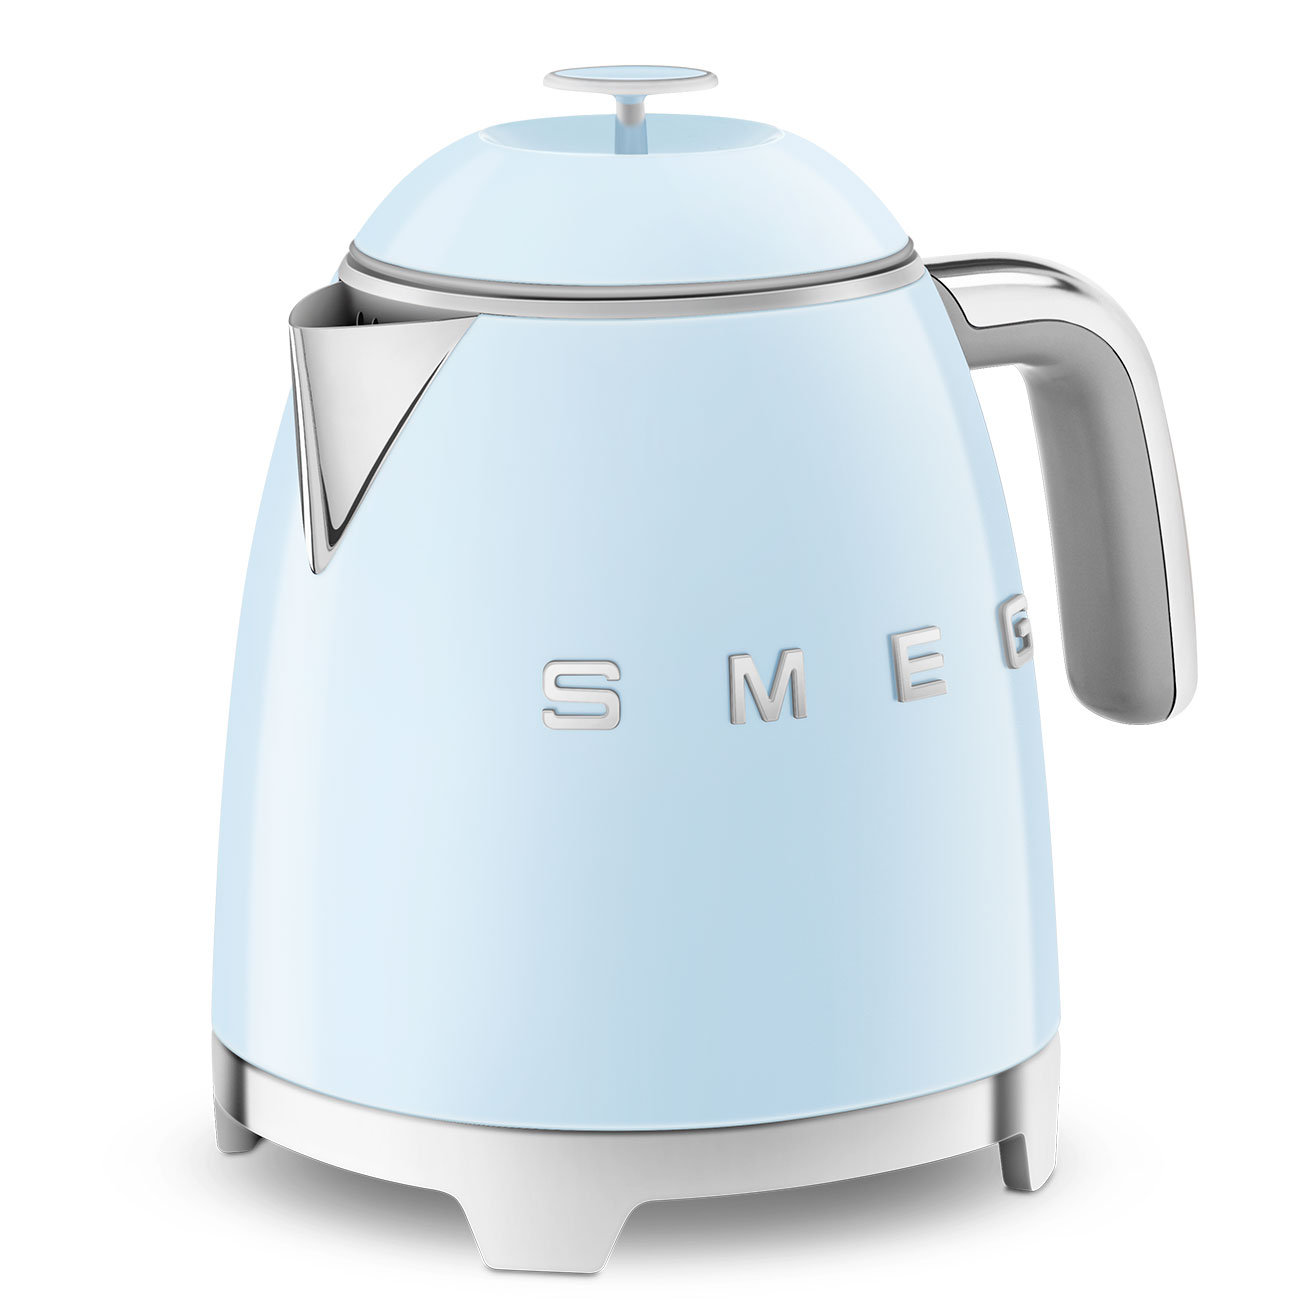  SMEG 7 CUP Kettle (Red): Home & Kitchen